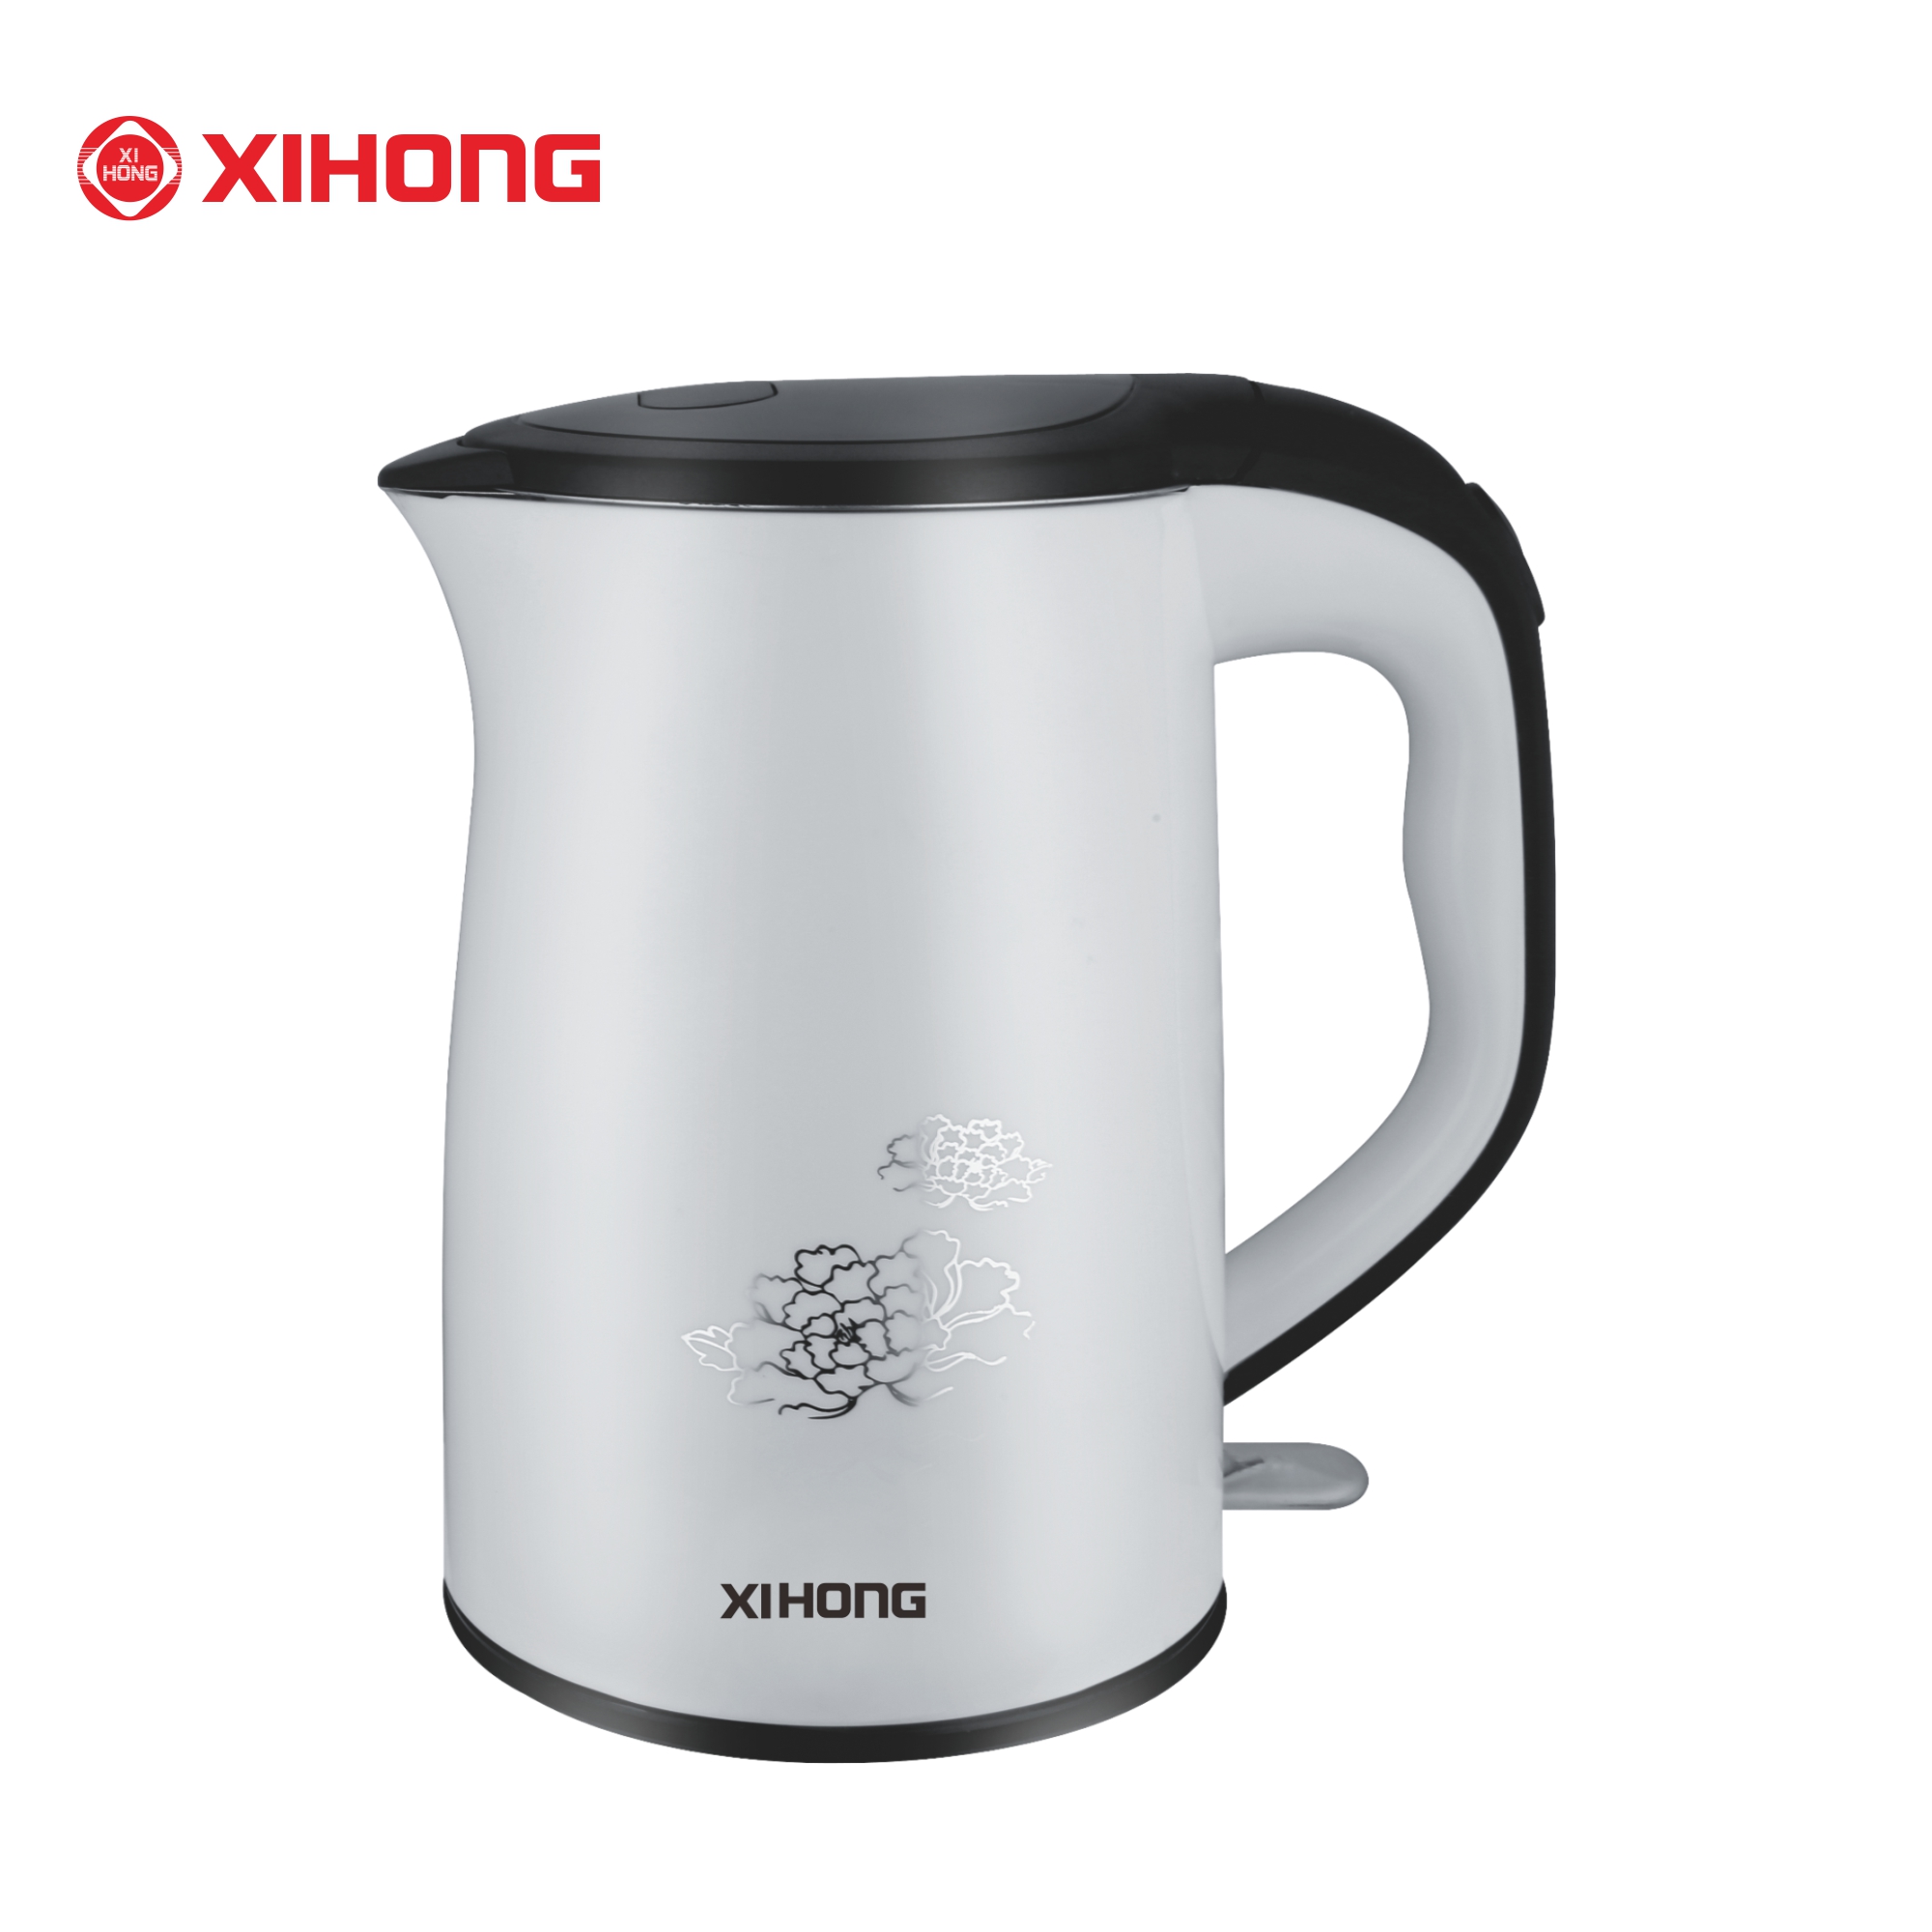 Electric Kettle fashionable double-layer style